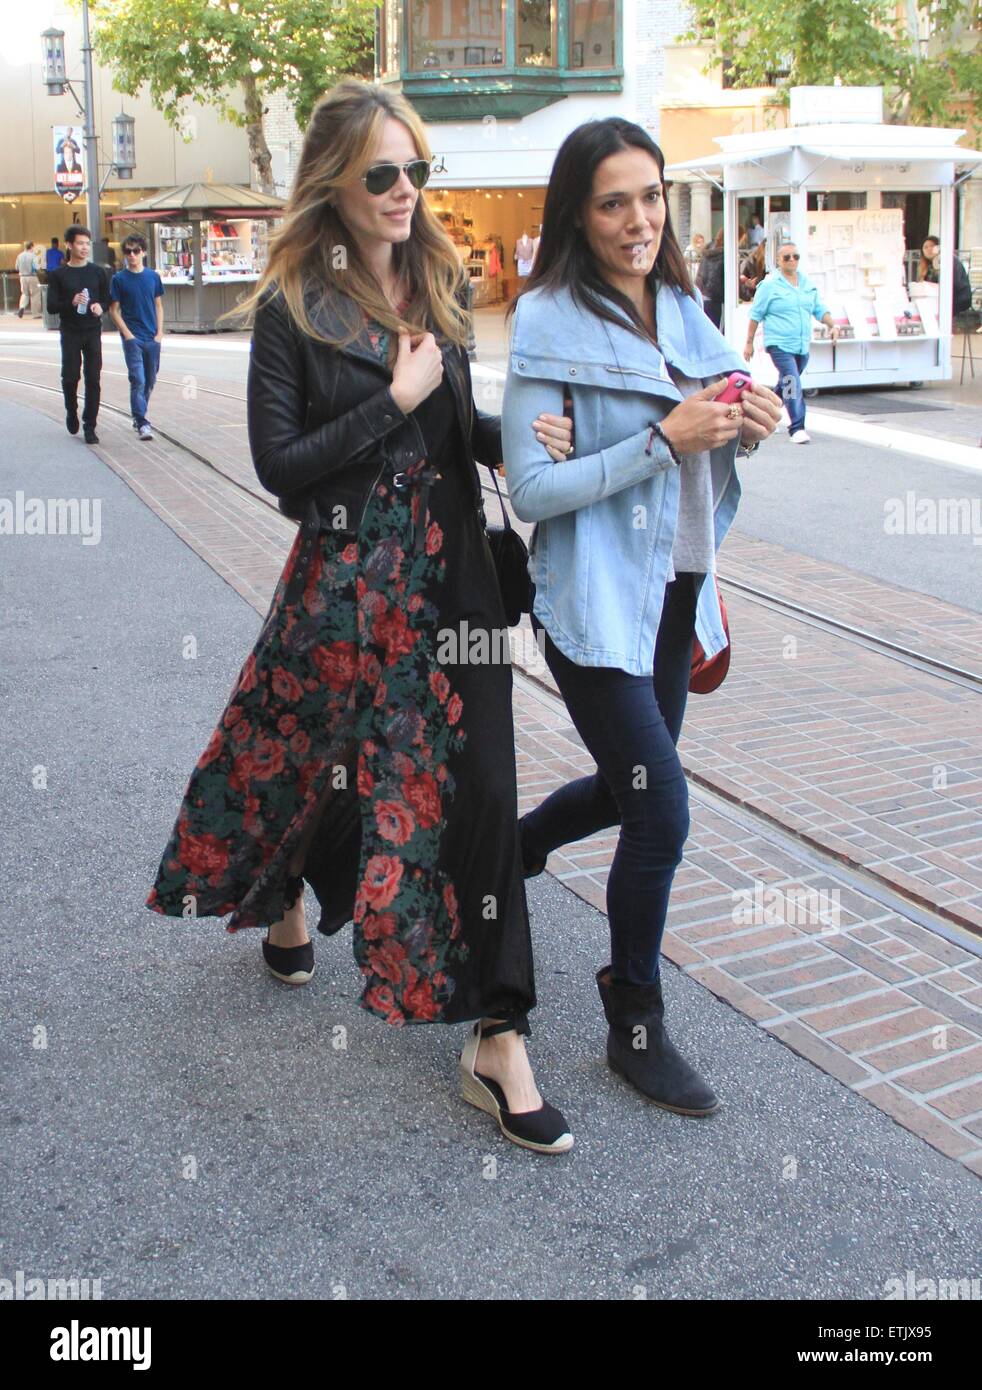 Monet Mazur goes shopping at The Grove in Hollywood with a friend  Featuring: Monet Mazur Where: Los Angeles, California, United States When: 04 Mar 2015 Credit: WENN.com Stock Photo